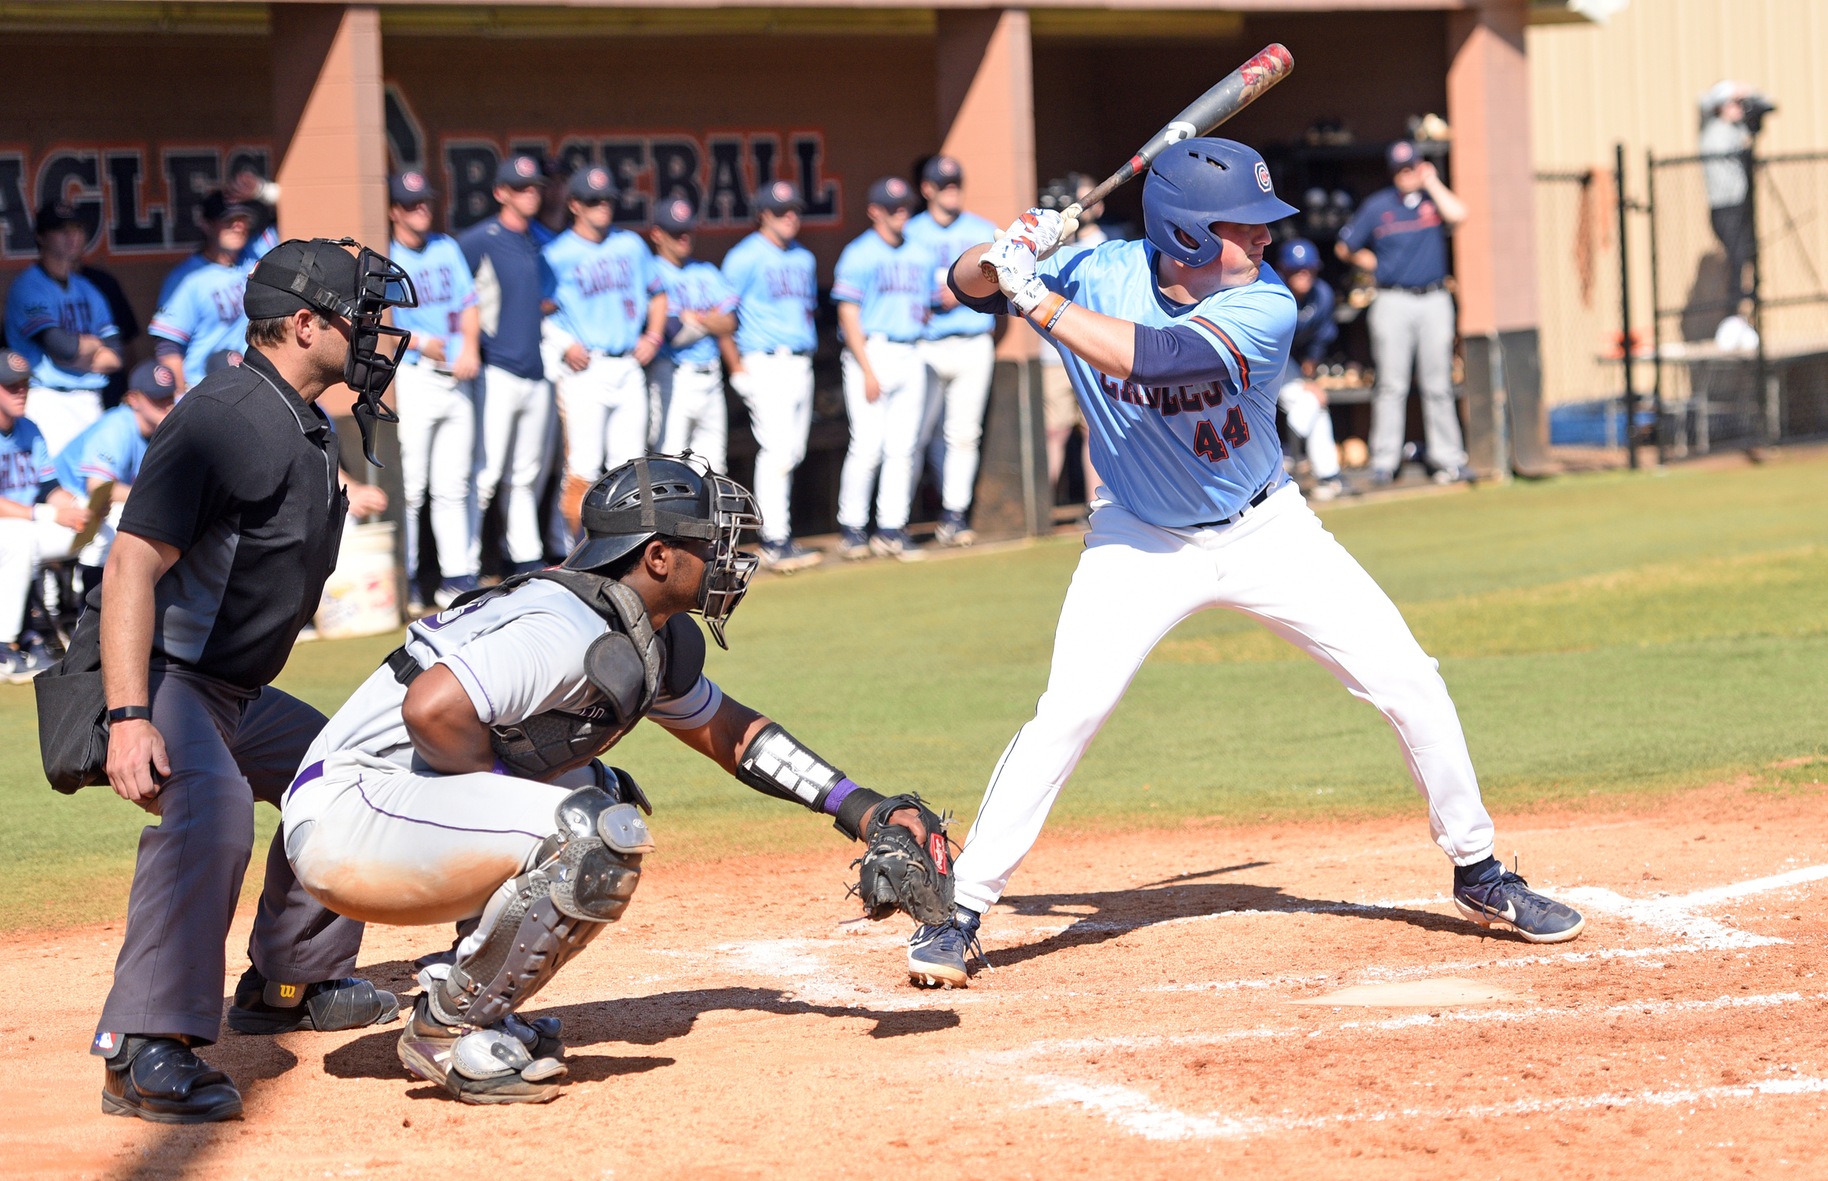 Griffin’s group geared up for opening weekend at Limestone